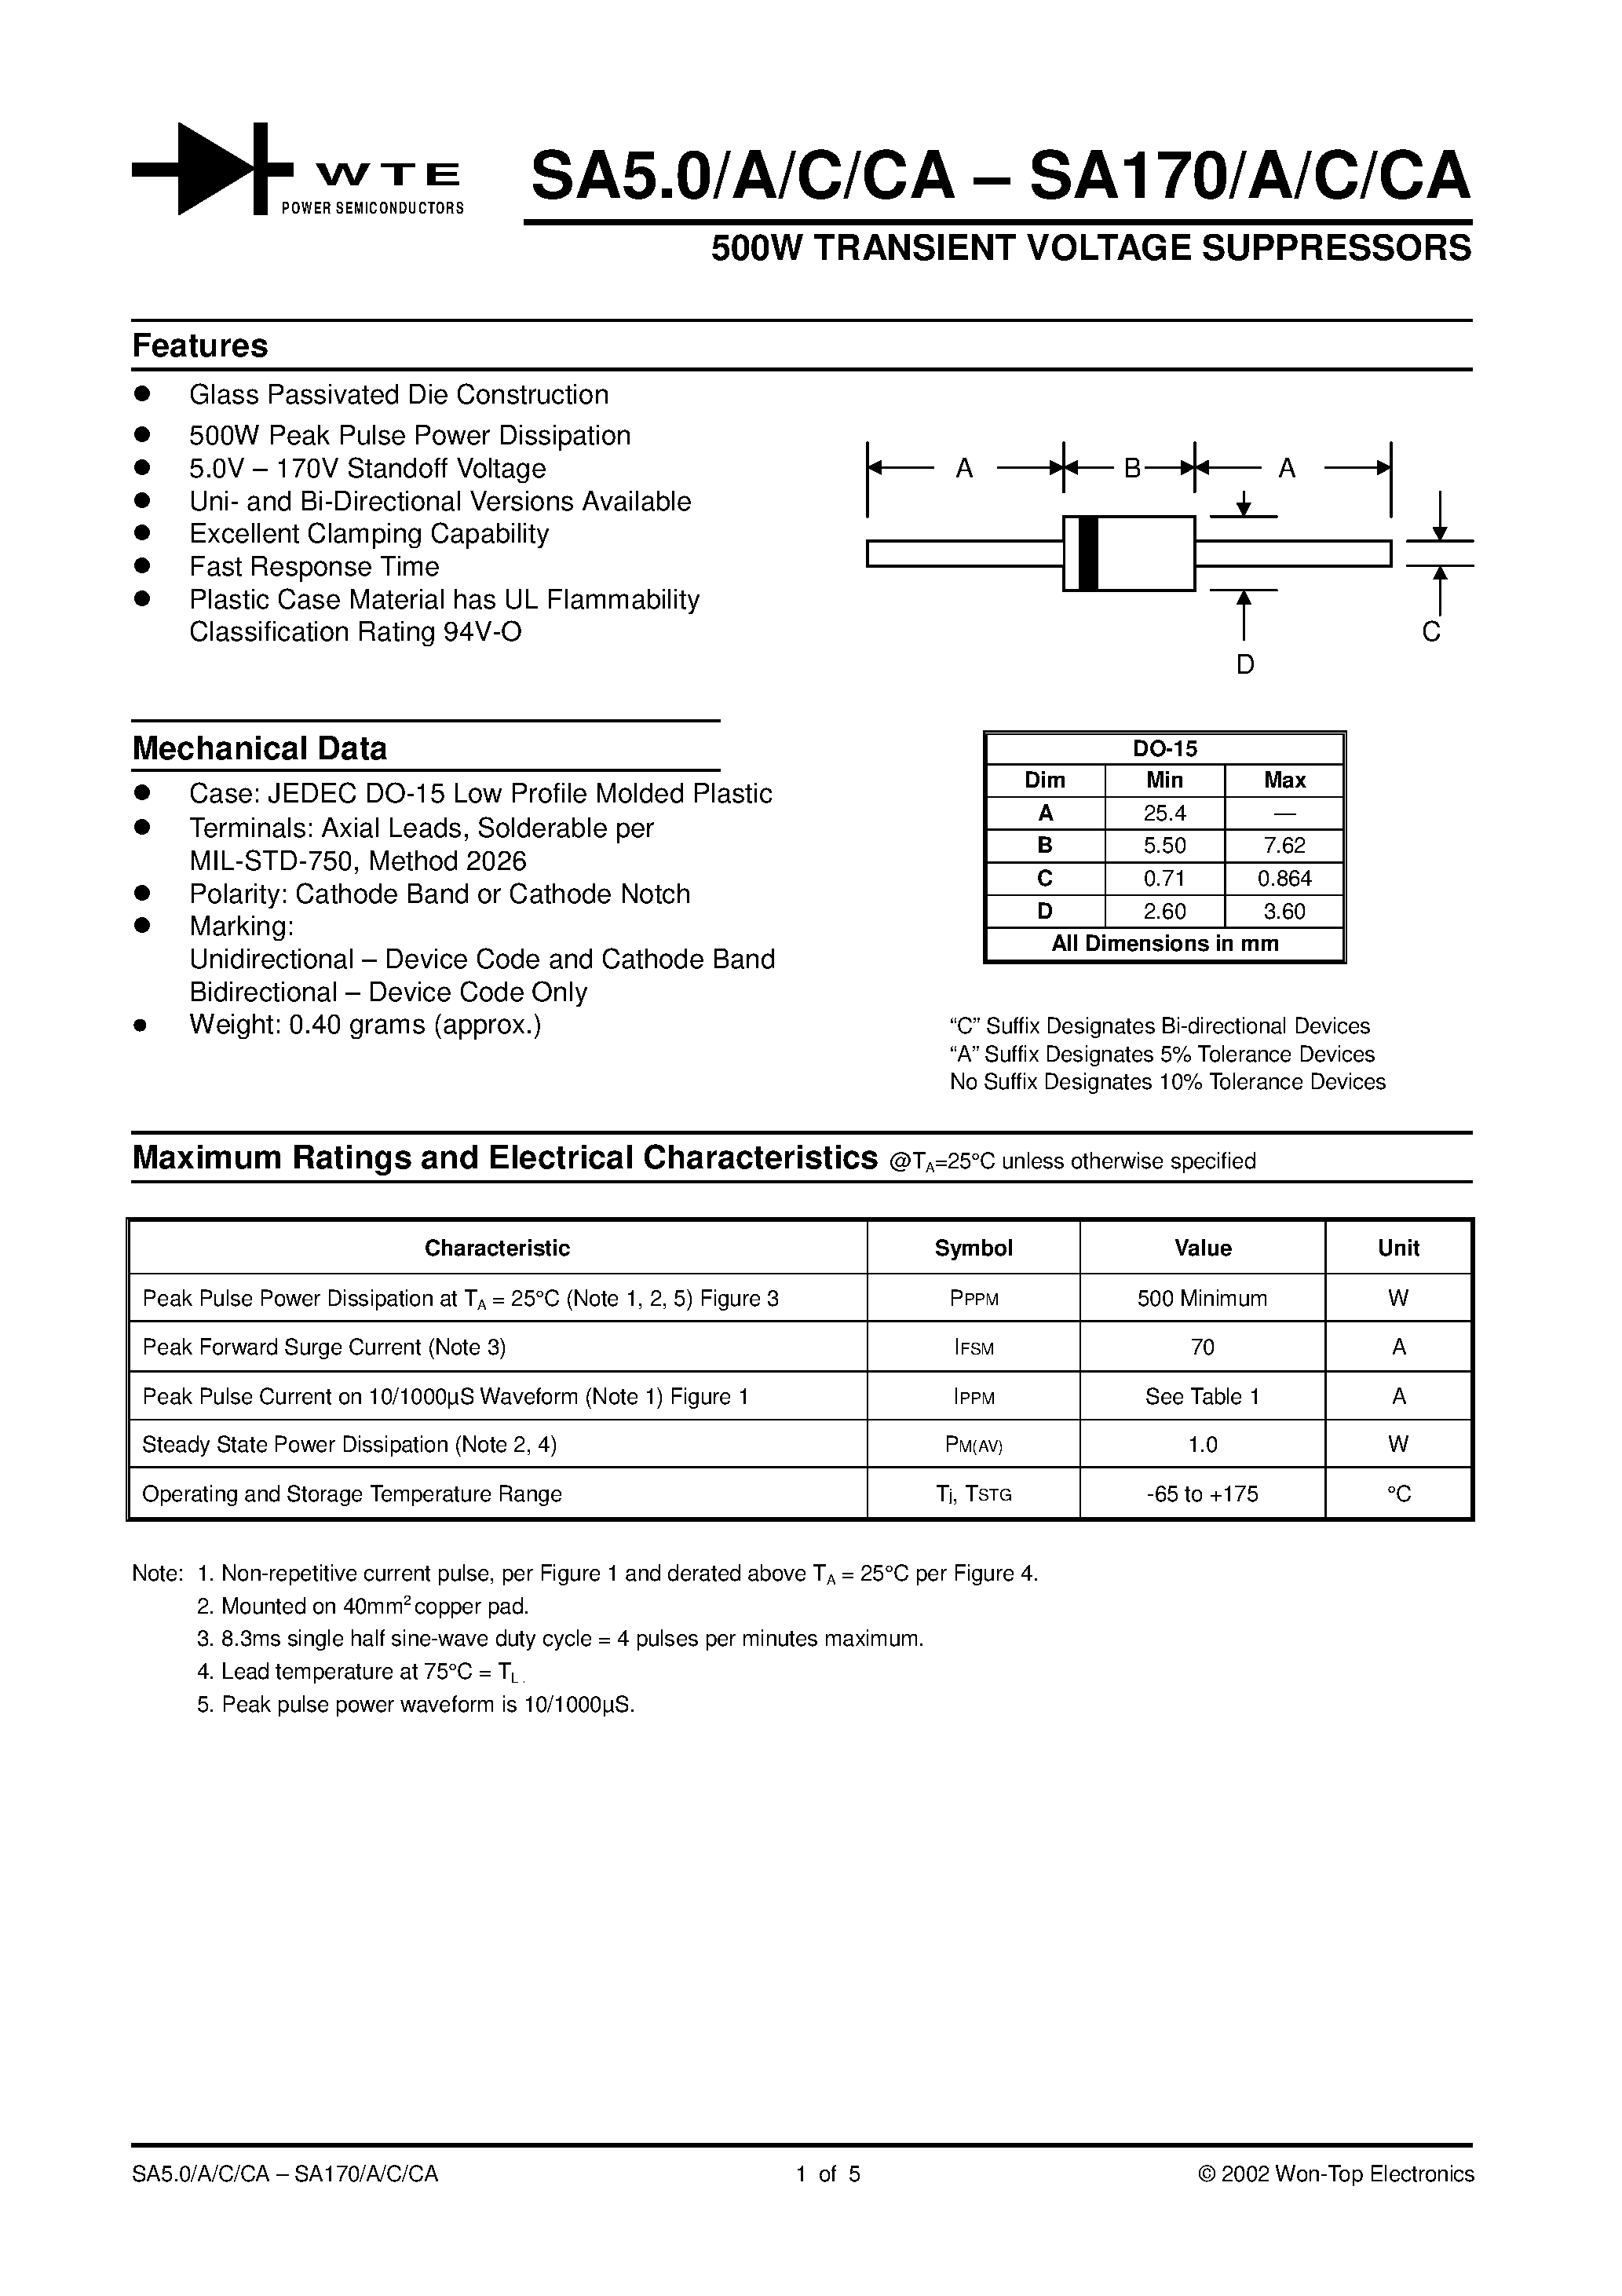 Datasheet SA28A - 500W TRANSIENT VOLTAGE SUPPRESSORS page 1